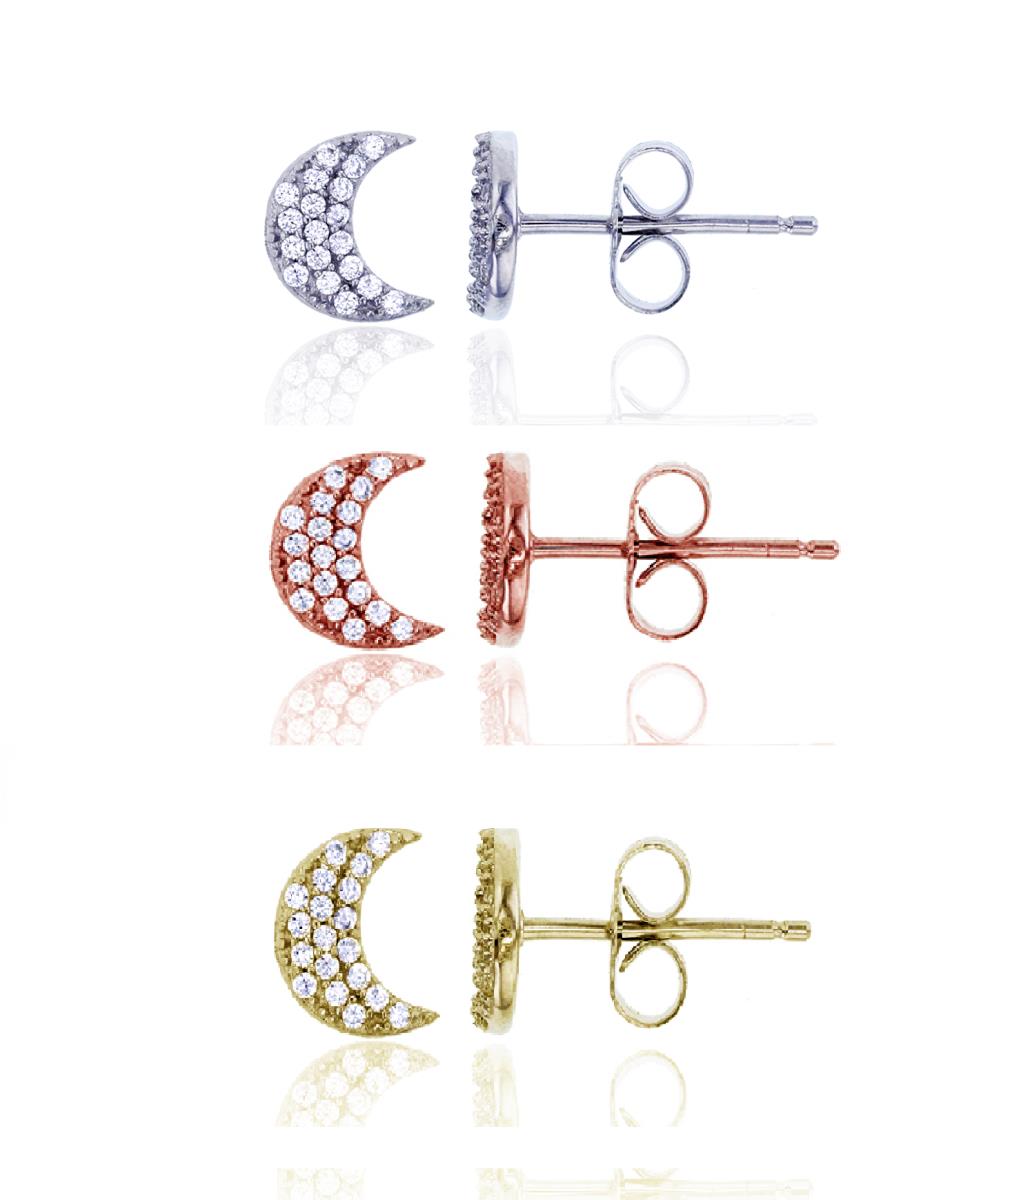 Sterling Silver Tricolor Micropave Crescent Moon Stud Earring Set